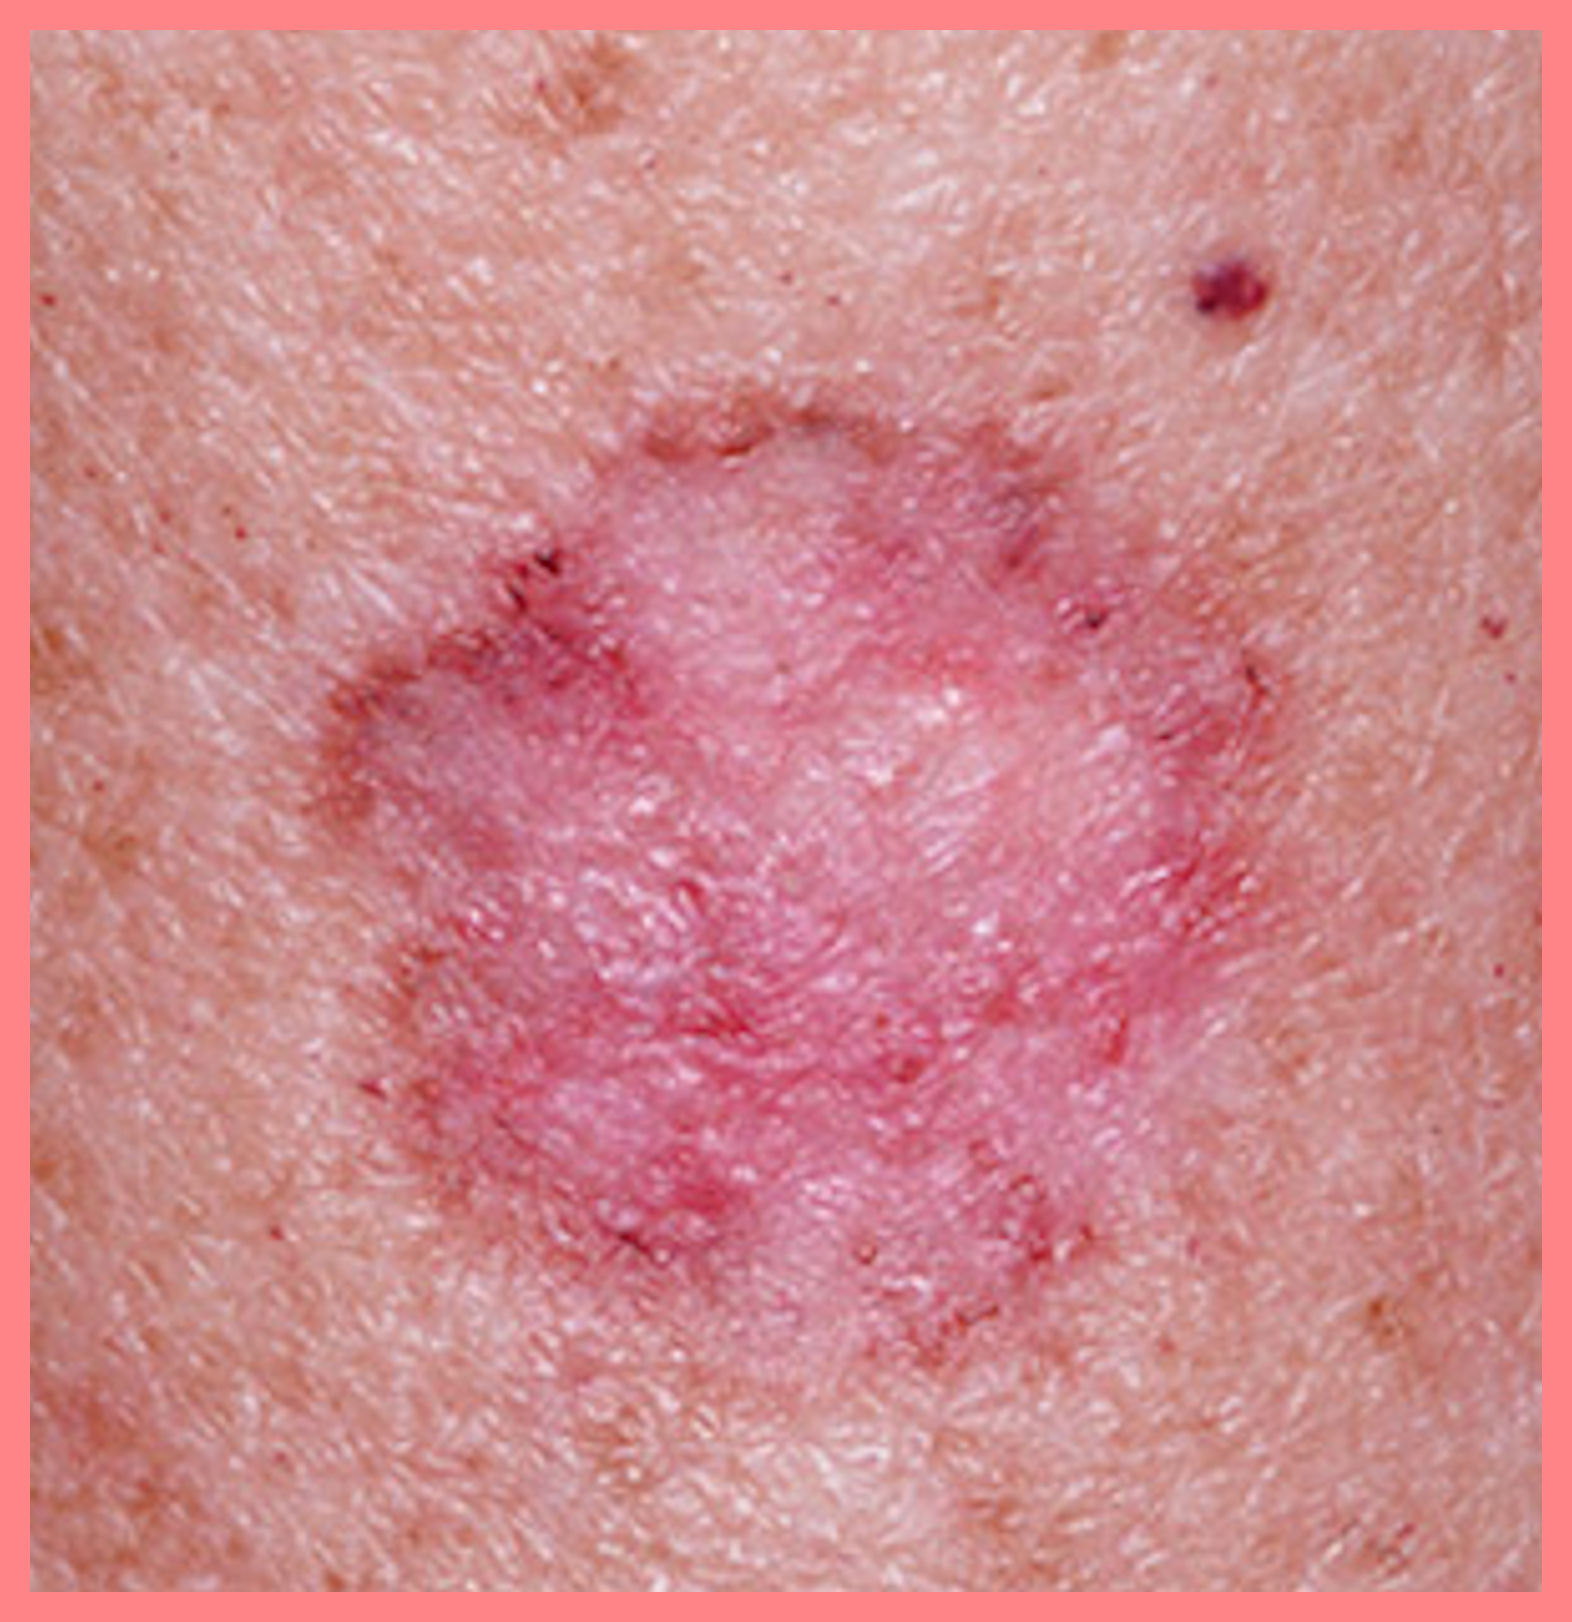 Pictures of Skin Diseases and Problems - Psoriasis